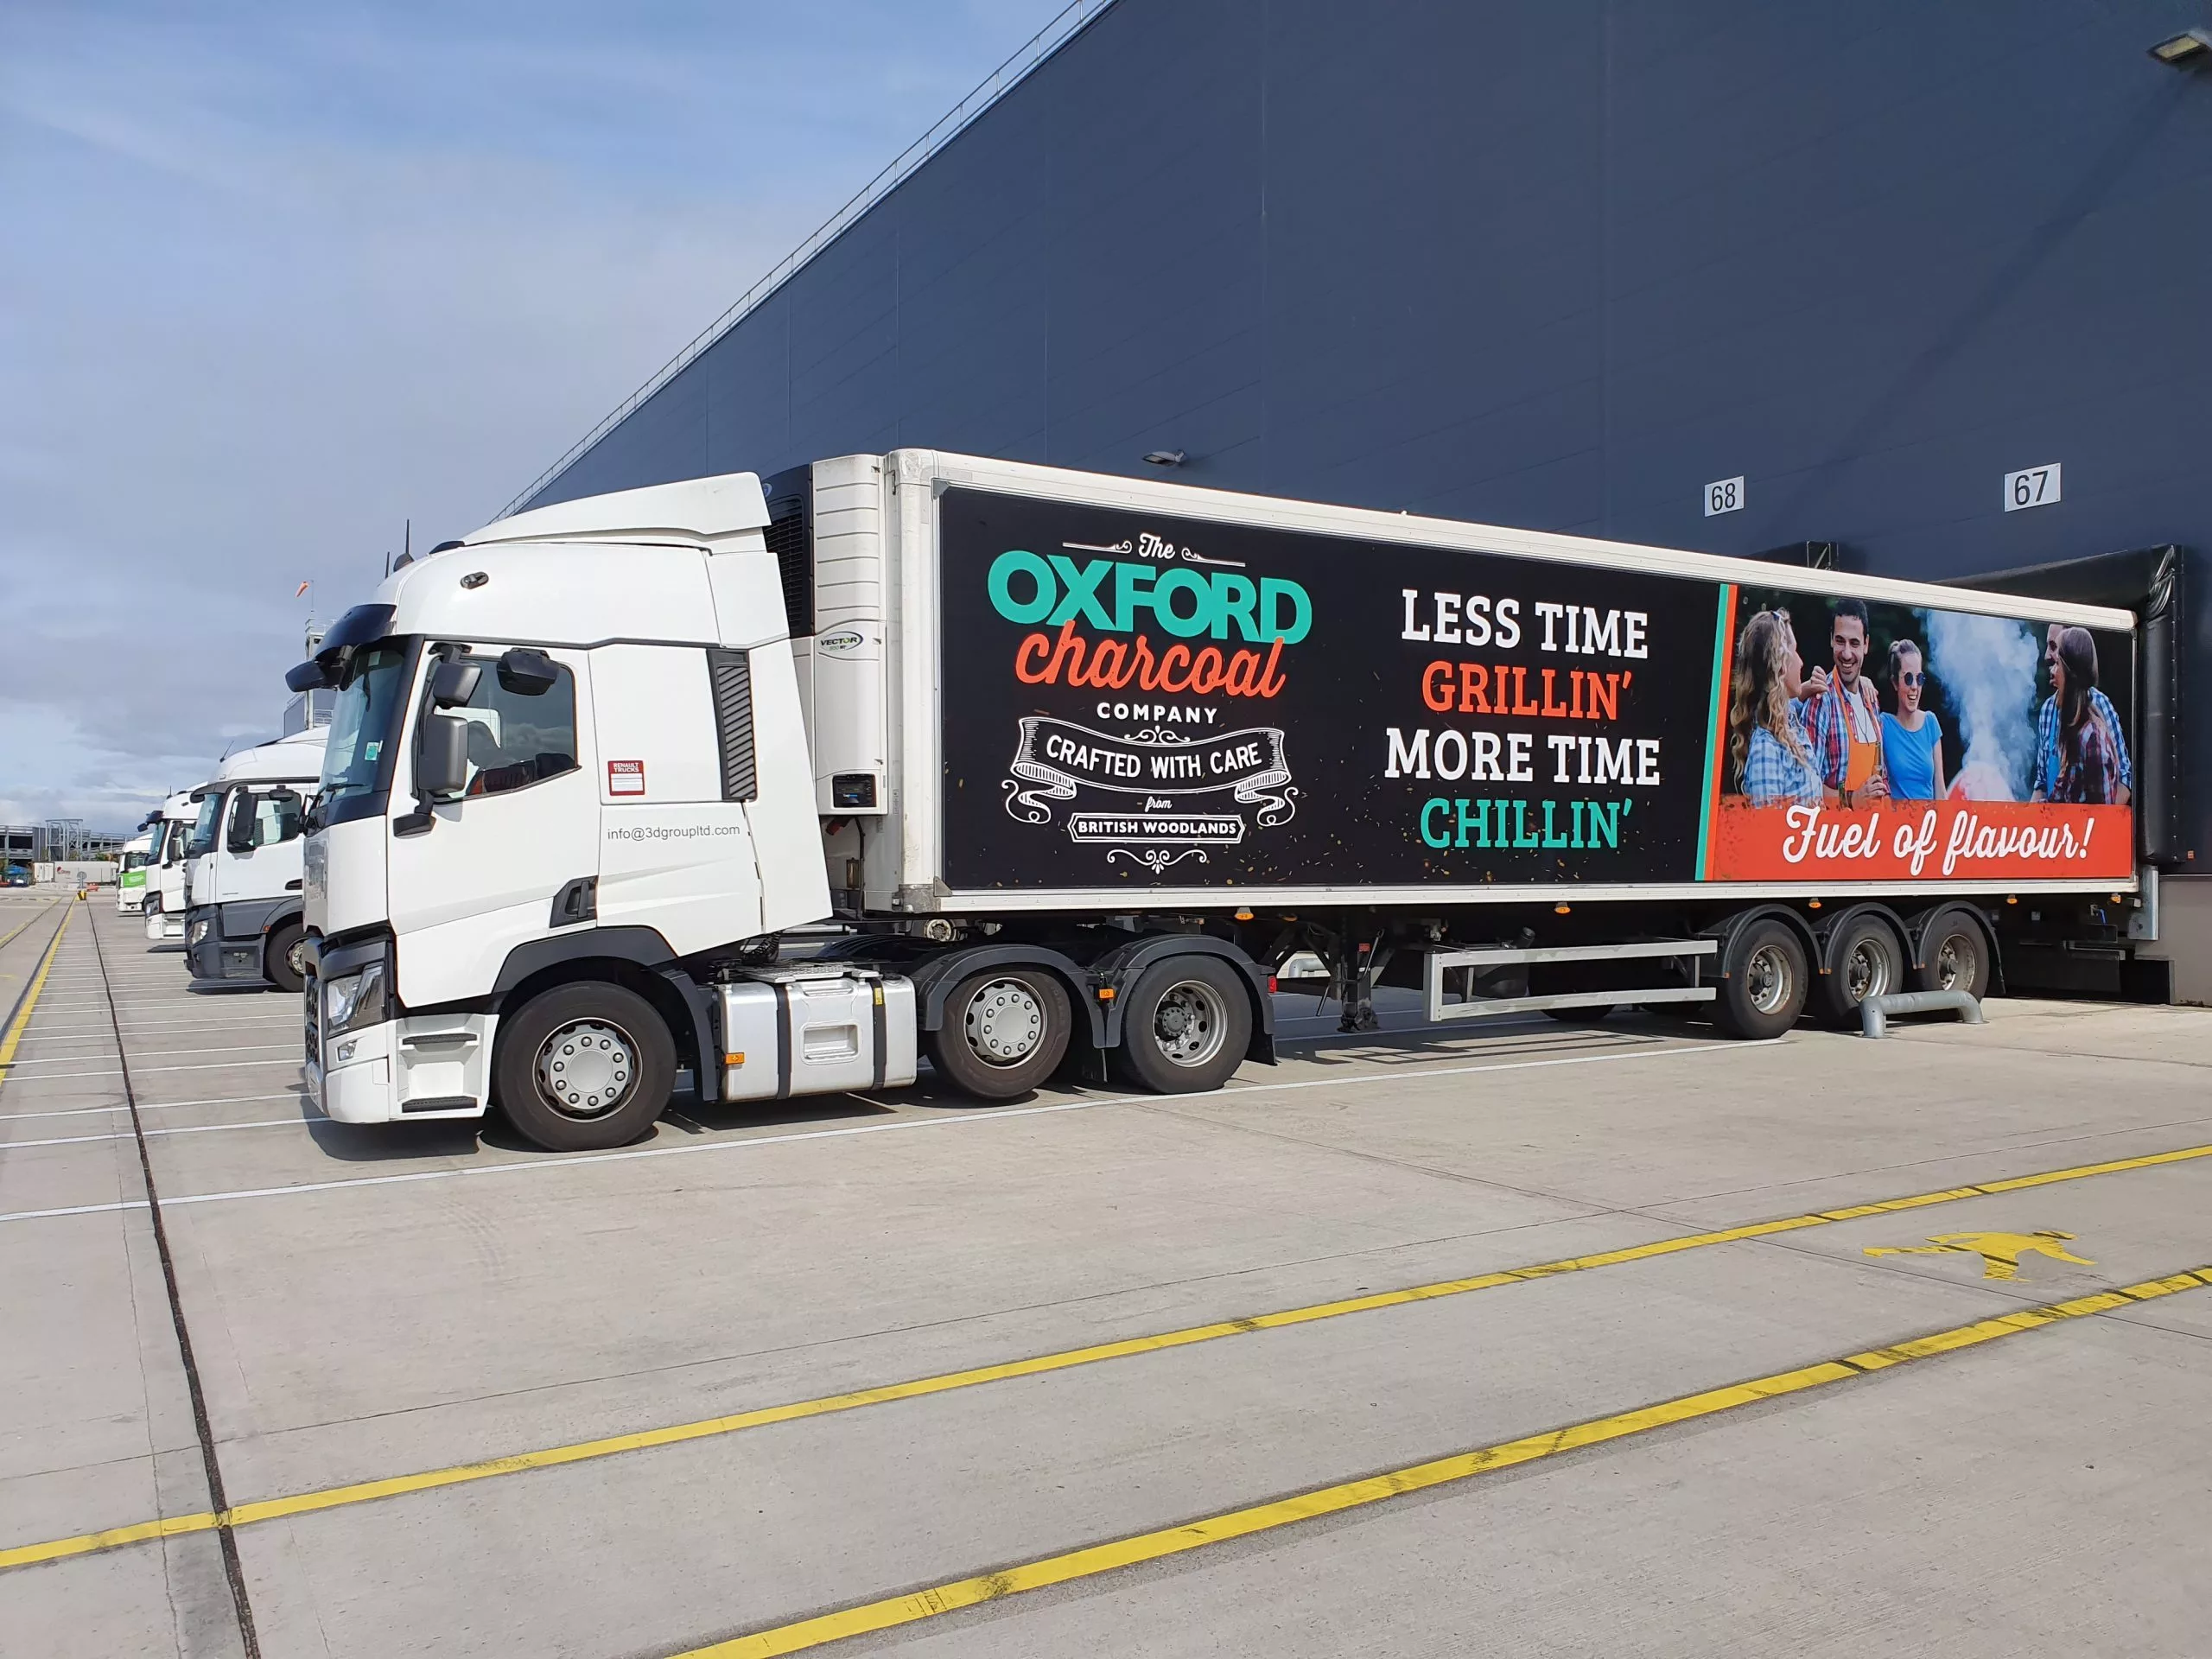 The Oxford Charcoal Company | Truck Advertising | UK